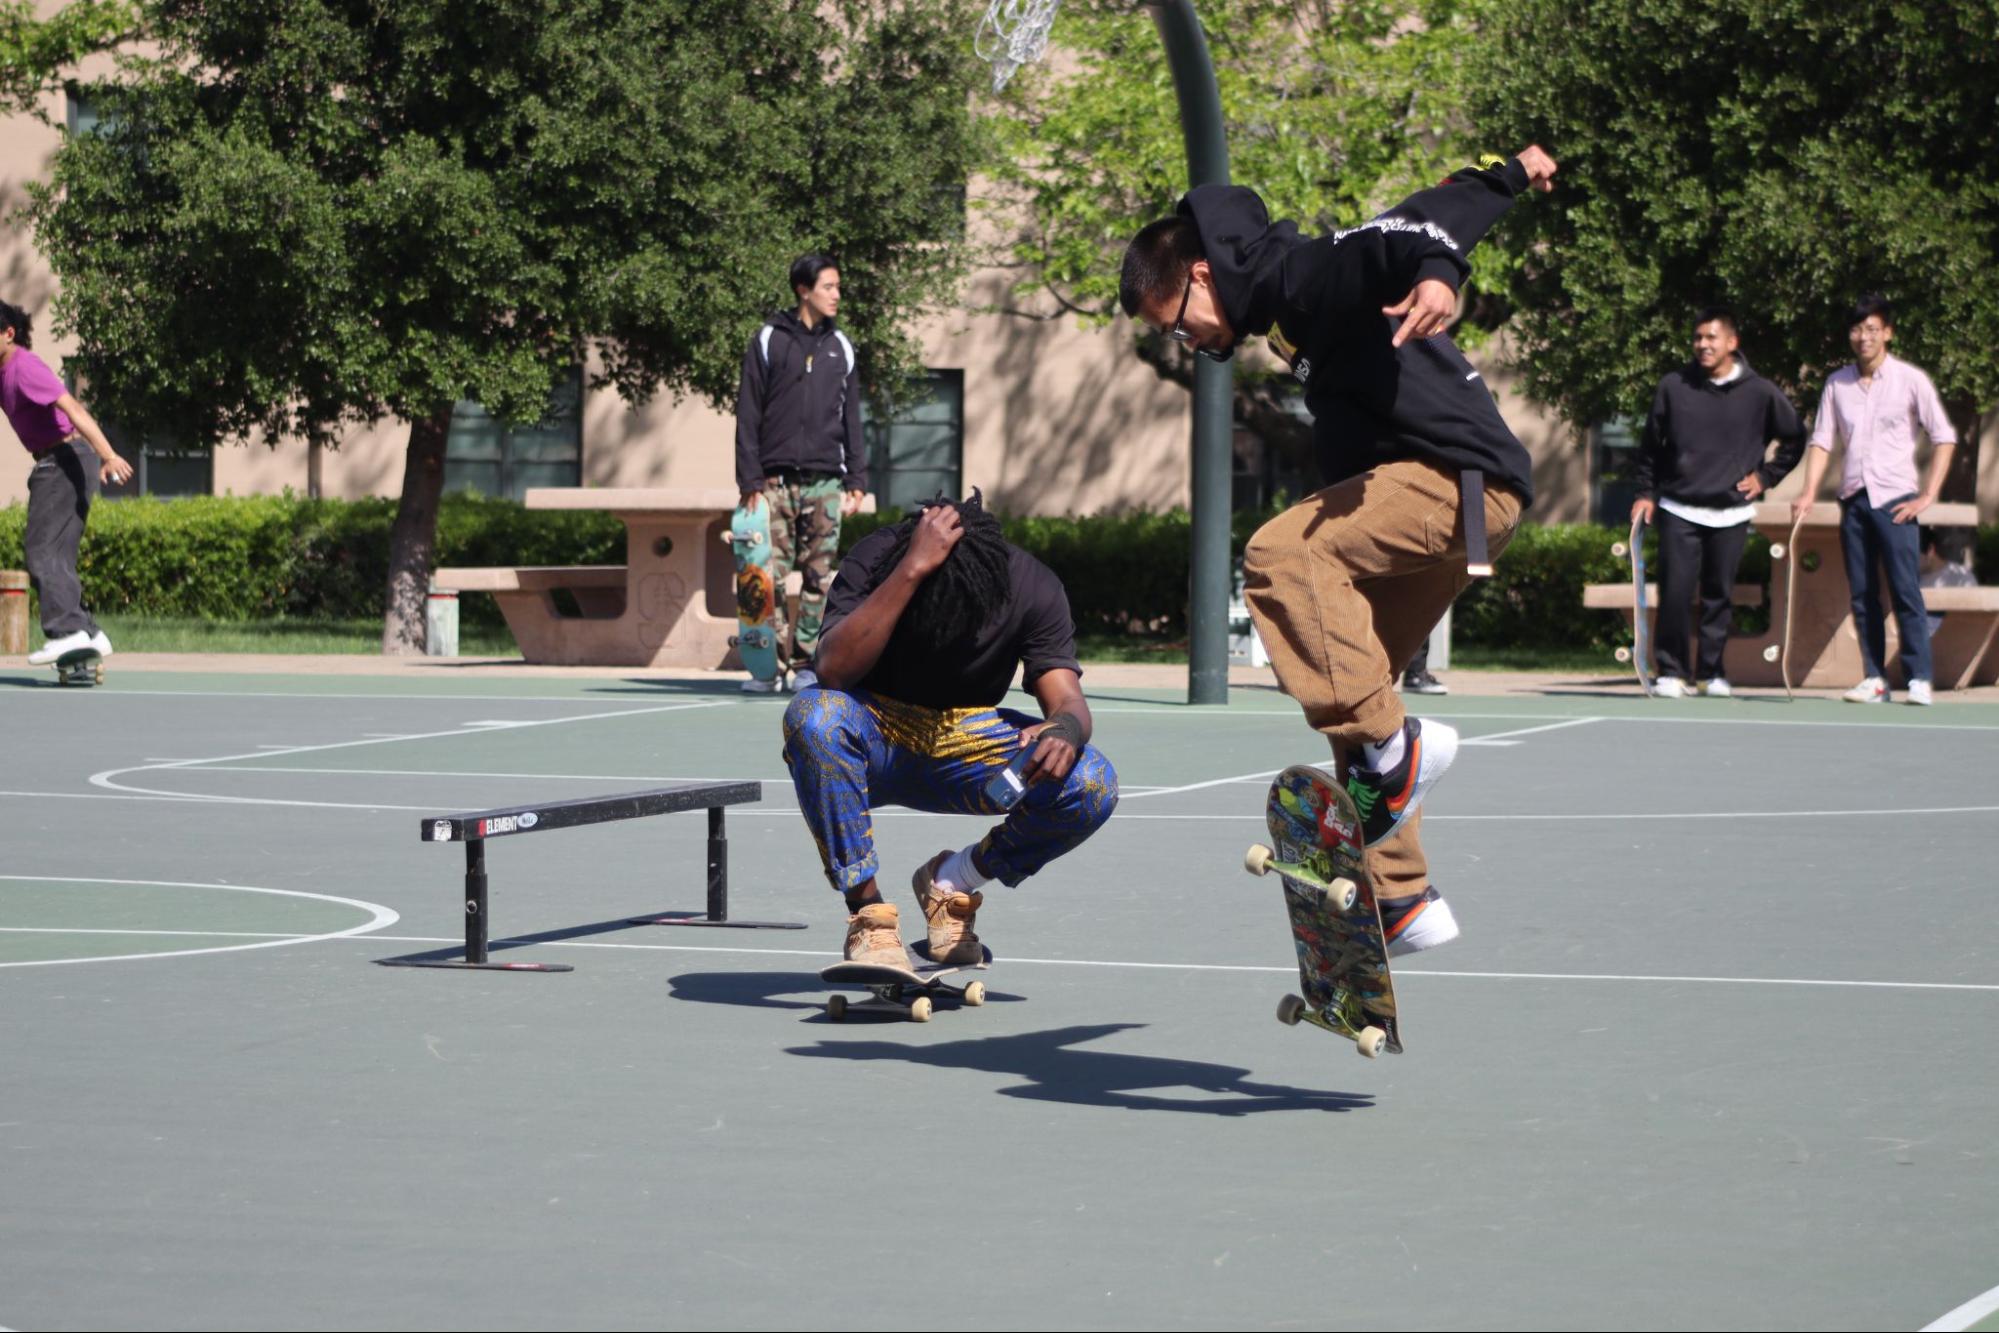 Defiance on wheels: FashionX and Stanford Skate Club show skater fashion at its finest